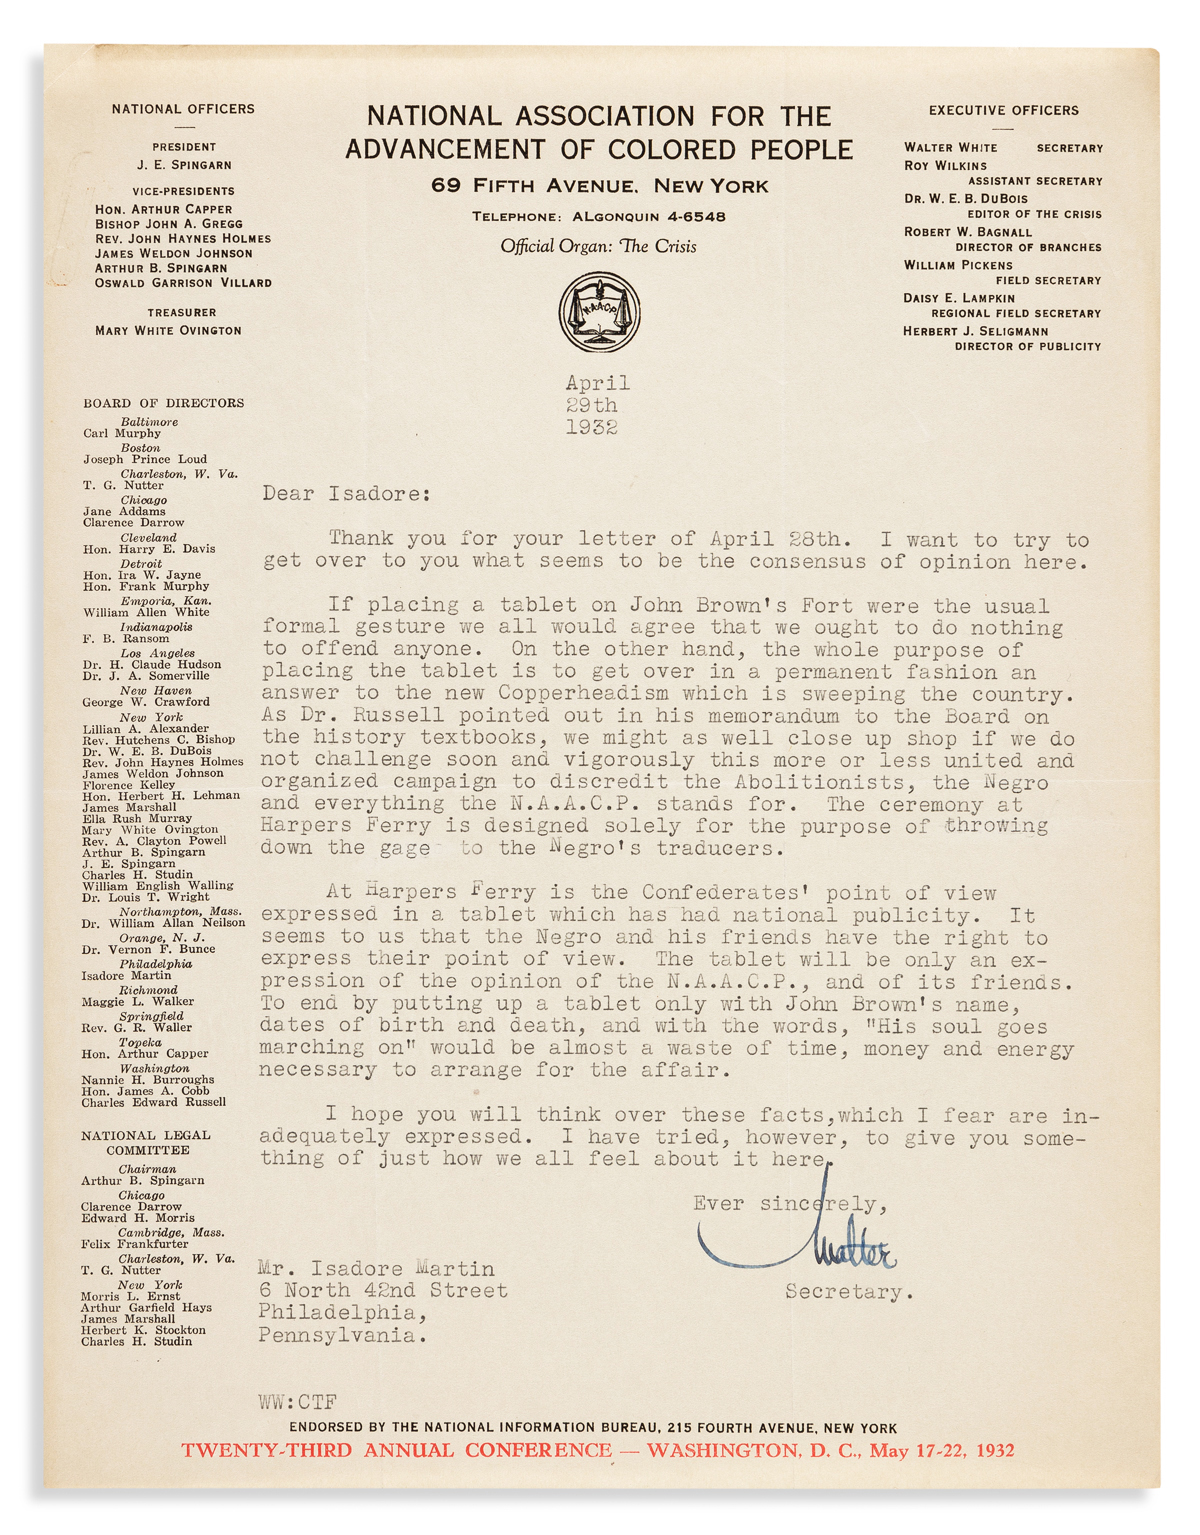 (CIVIL RIGHTS.) Archive of NAACP correspondence from James Weldon Johnson, Walter White and more.